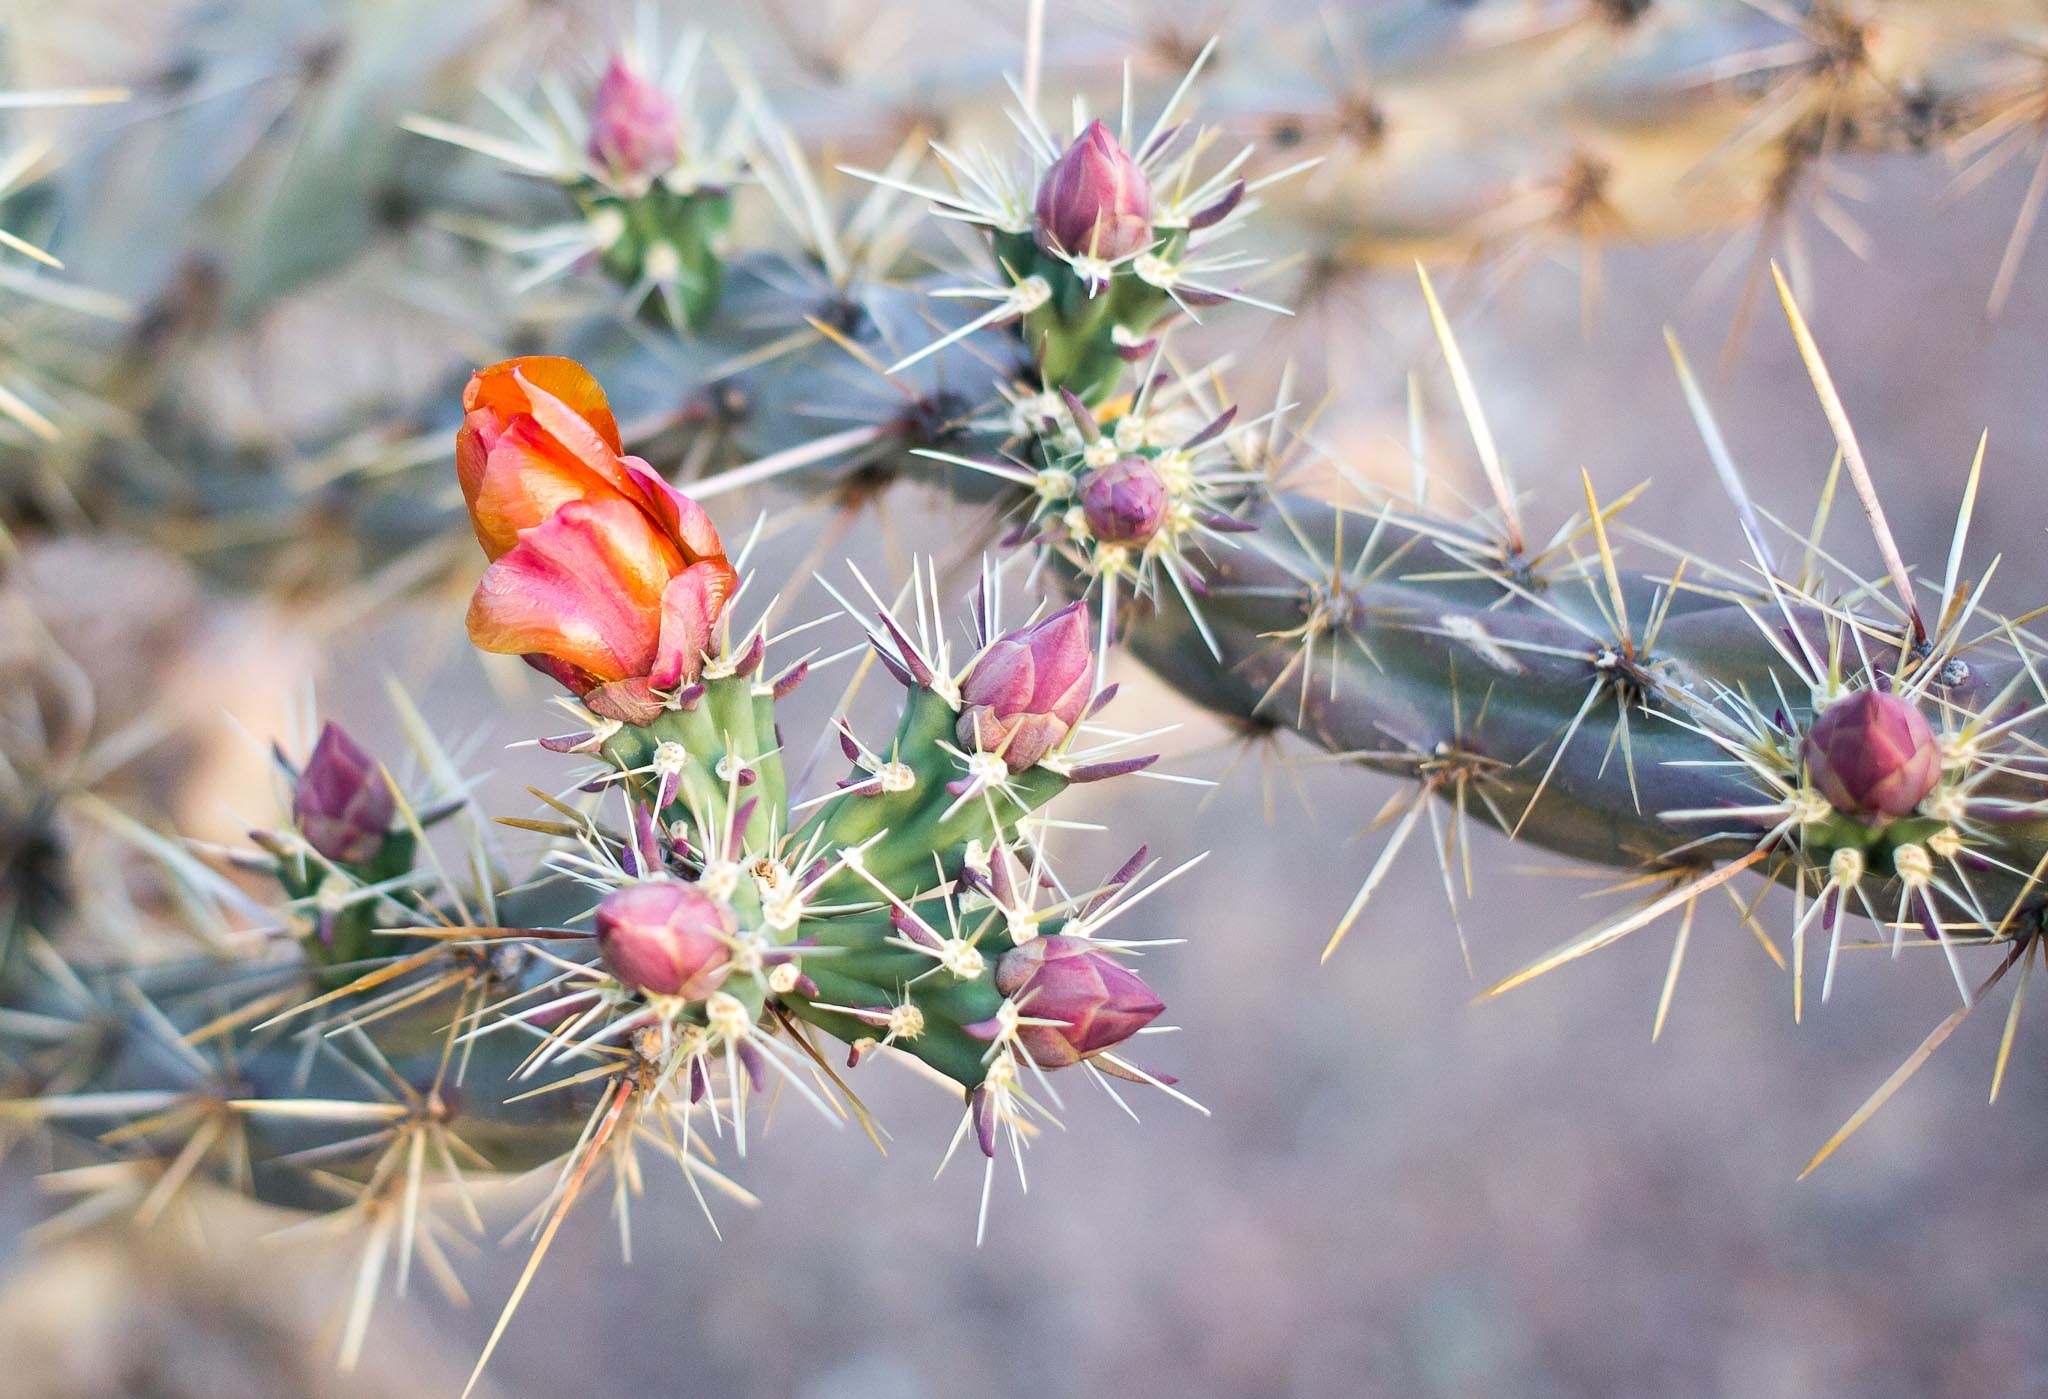 Cholla blossom and buds, Pancho Villa State Park, Columbus NM, April 22, 2016